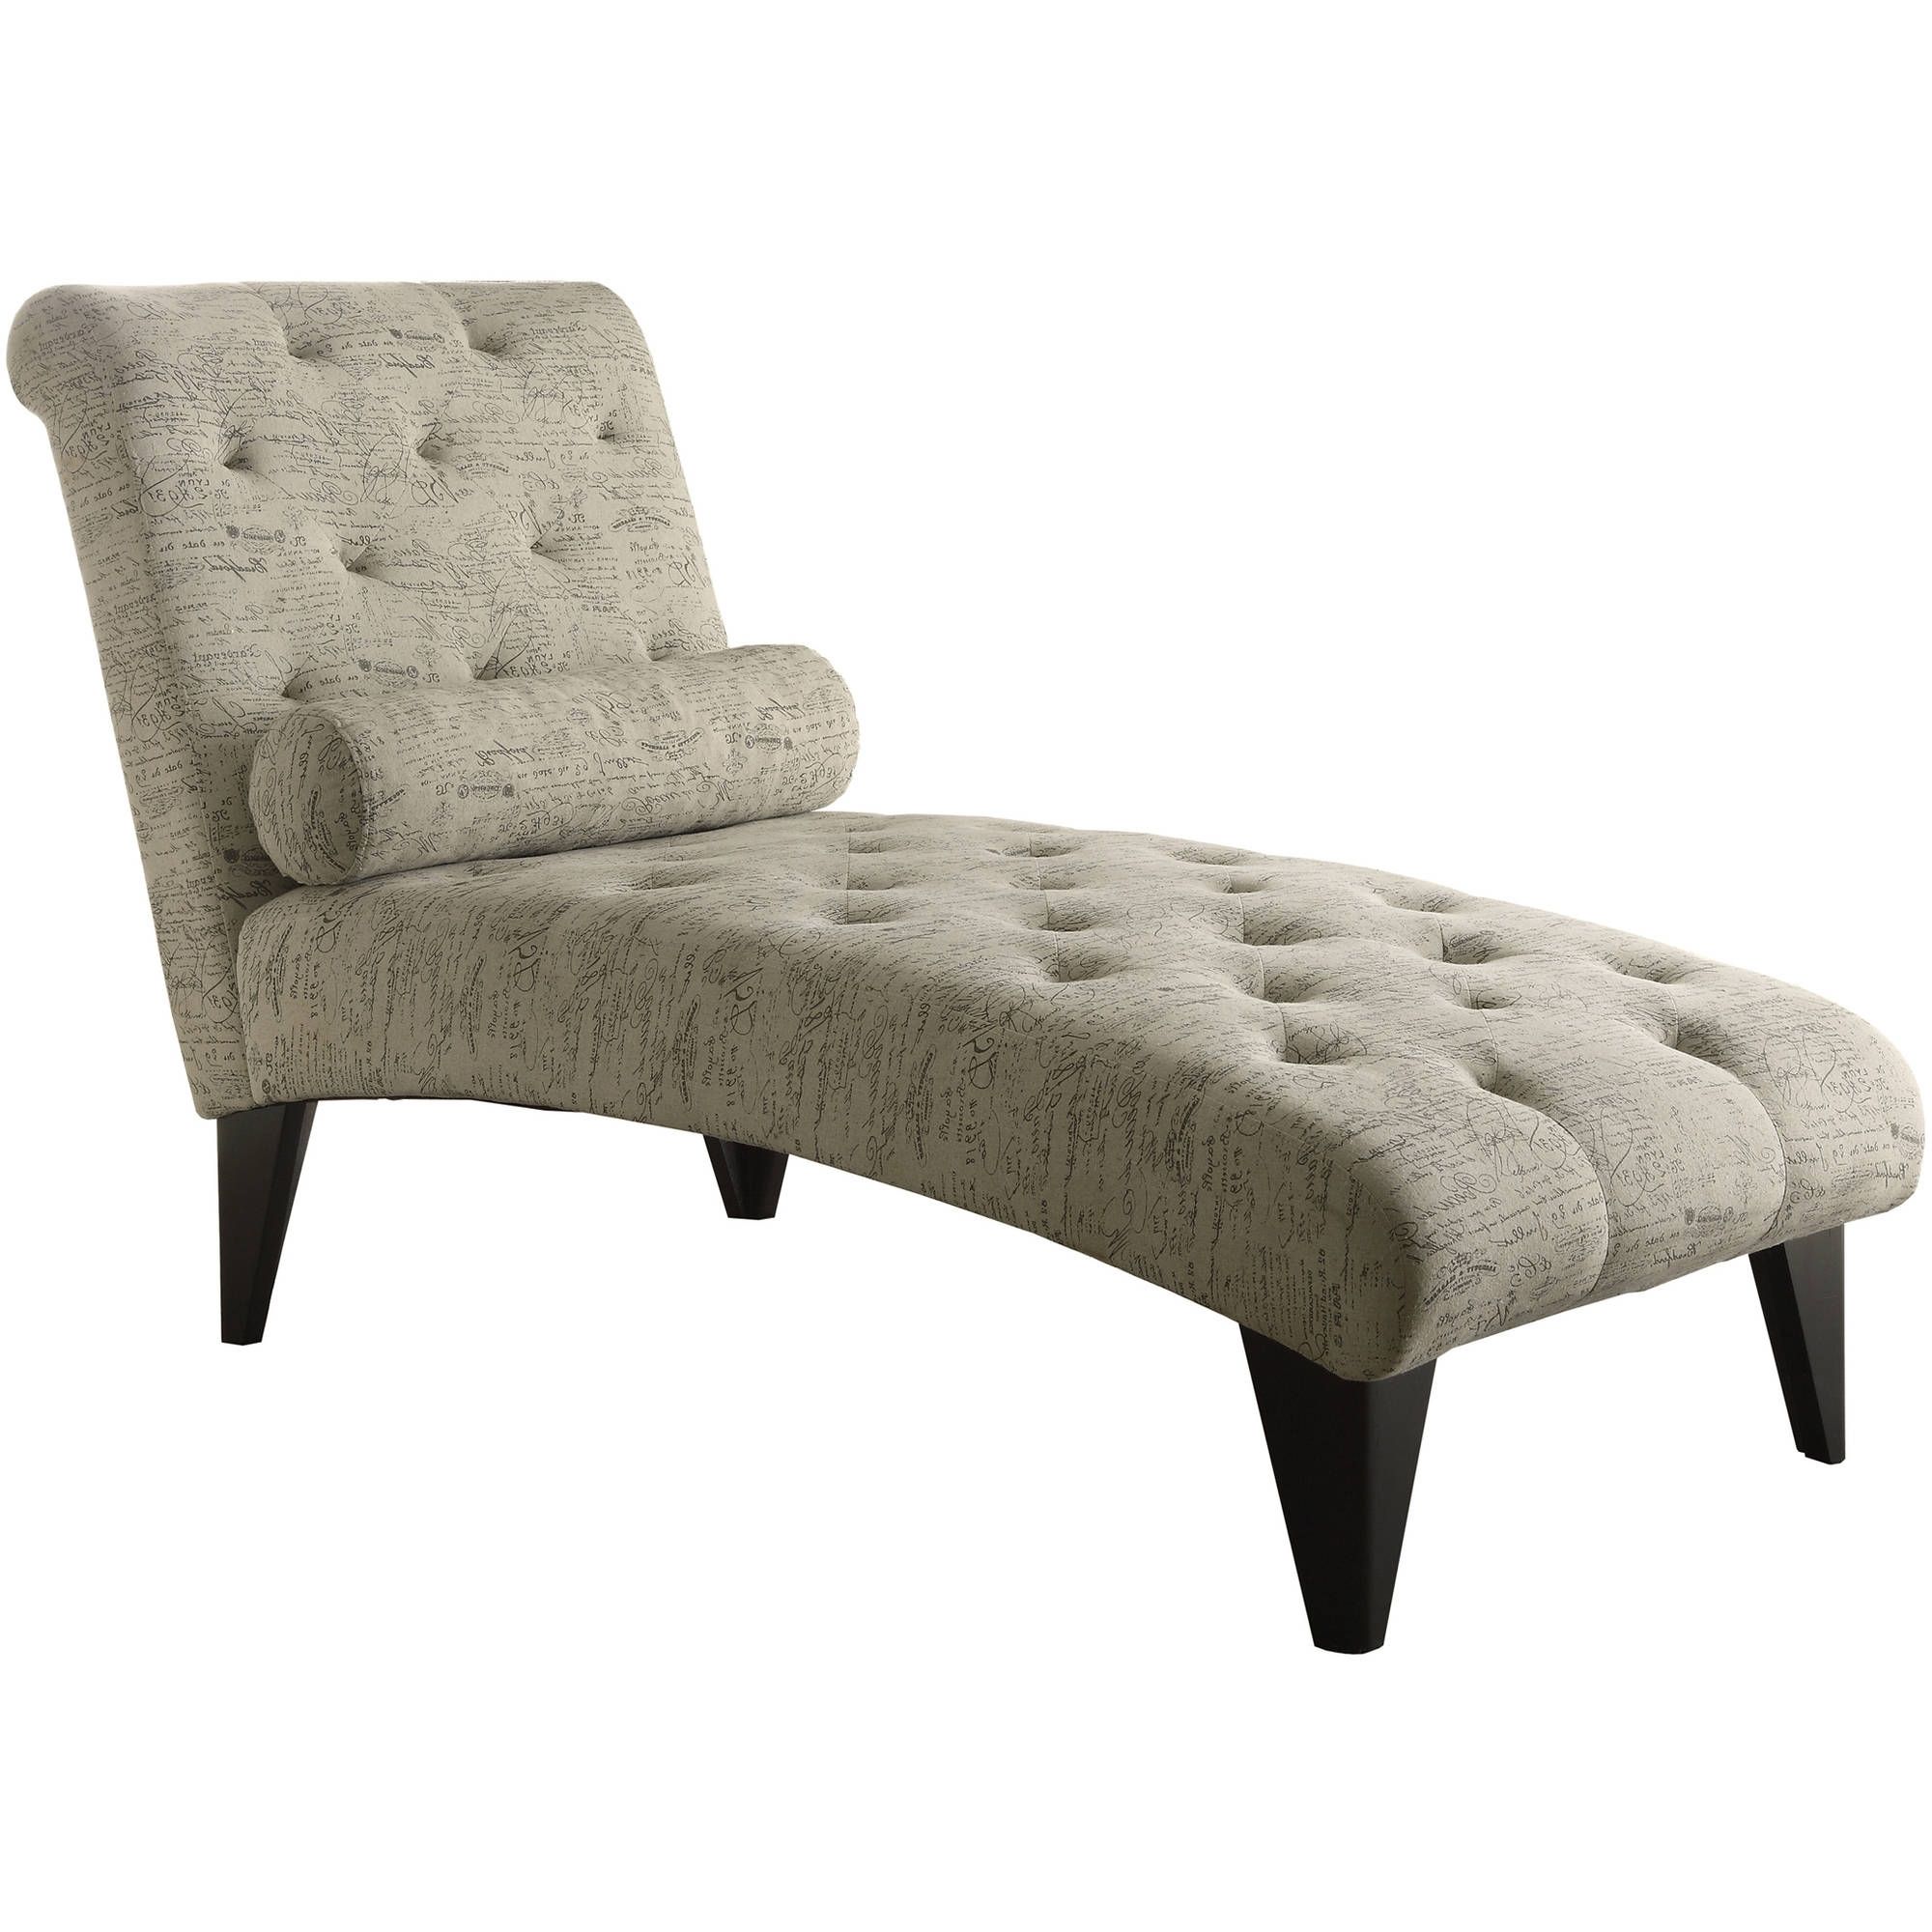 Adjustable Chaise Lounges Regarding Fashionable Chaise Lounges – Walmart (View 13 of 15)